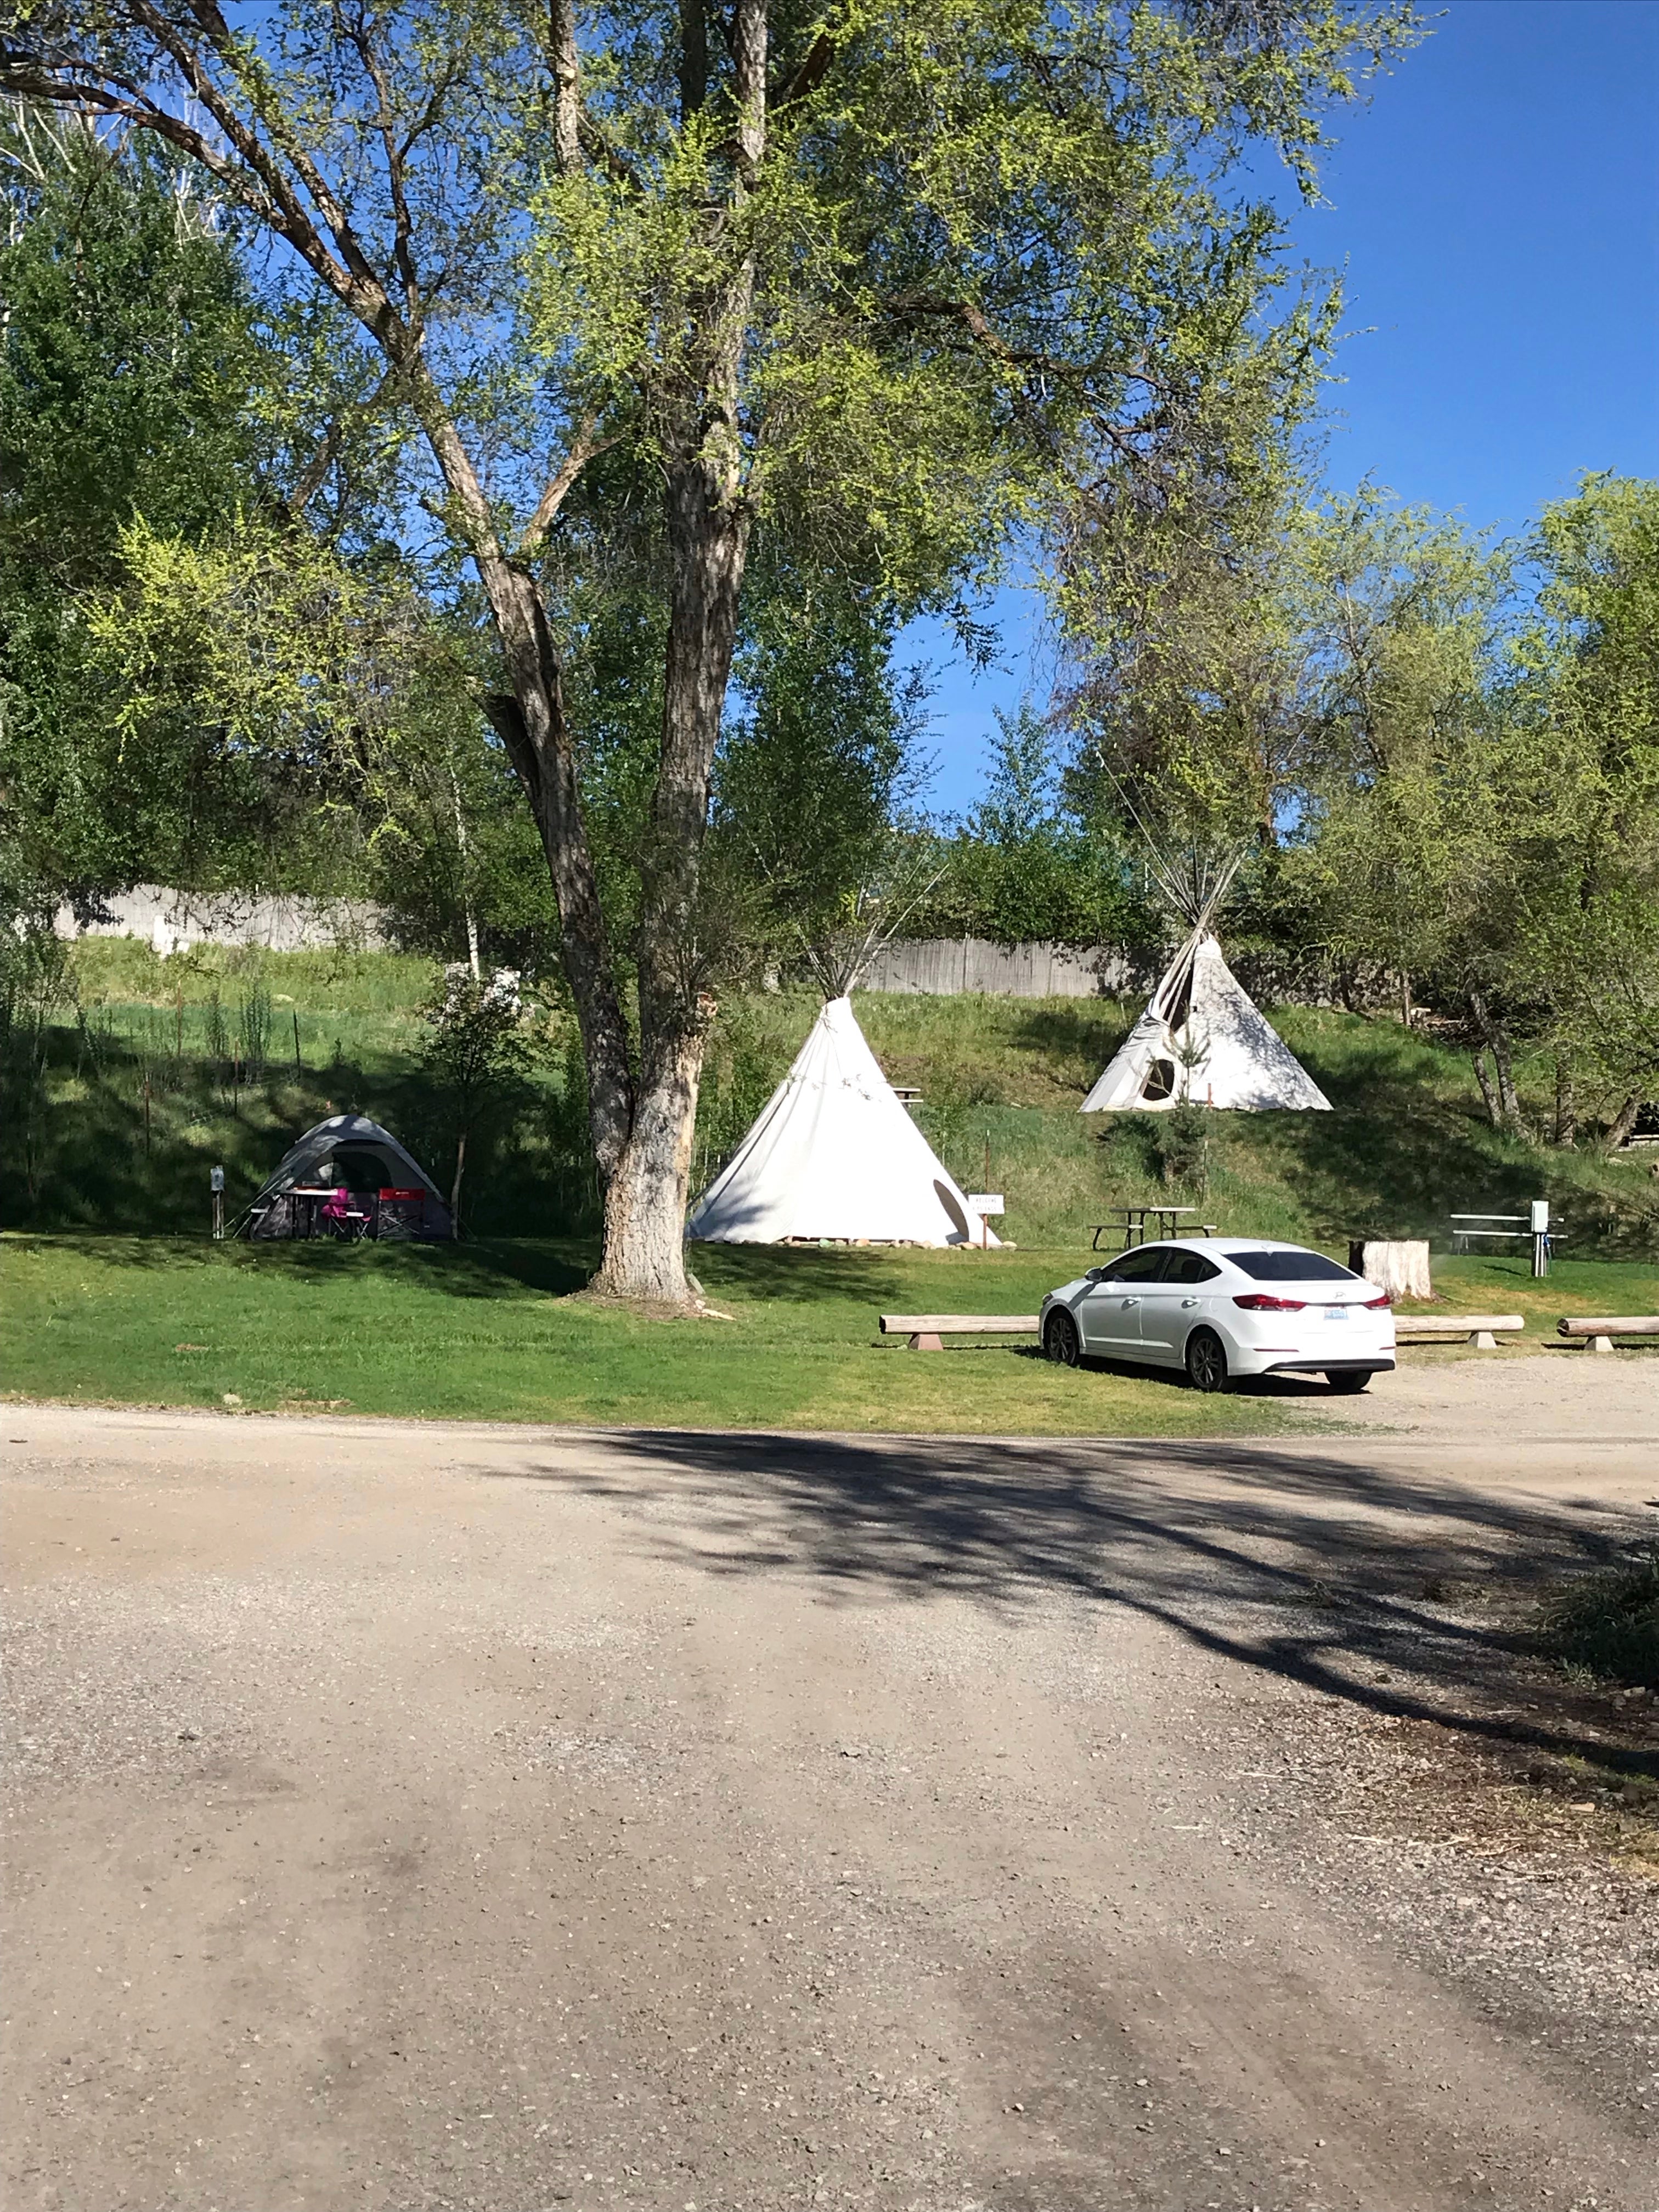 Teepee rentals, as well as cabins and rv sites